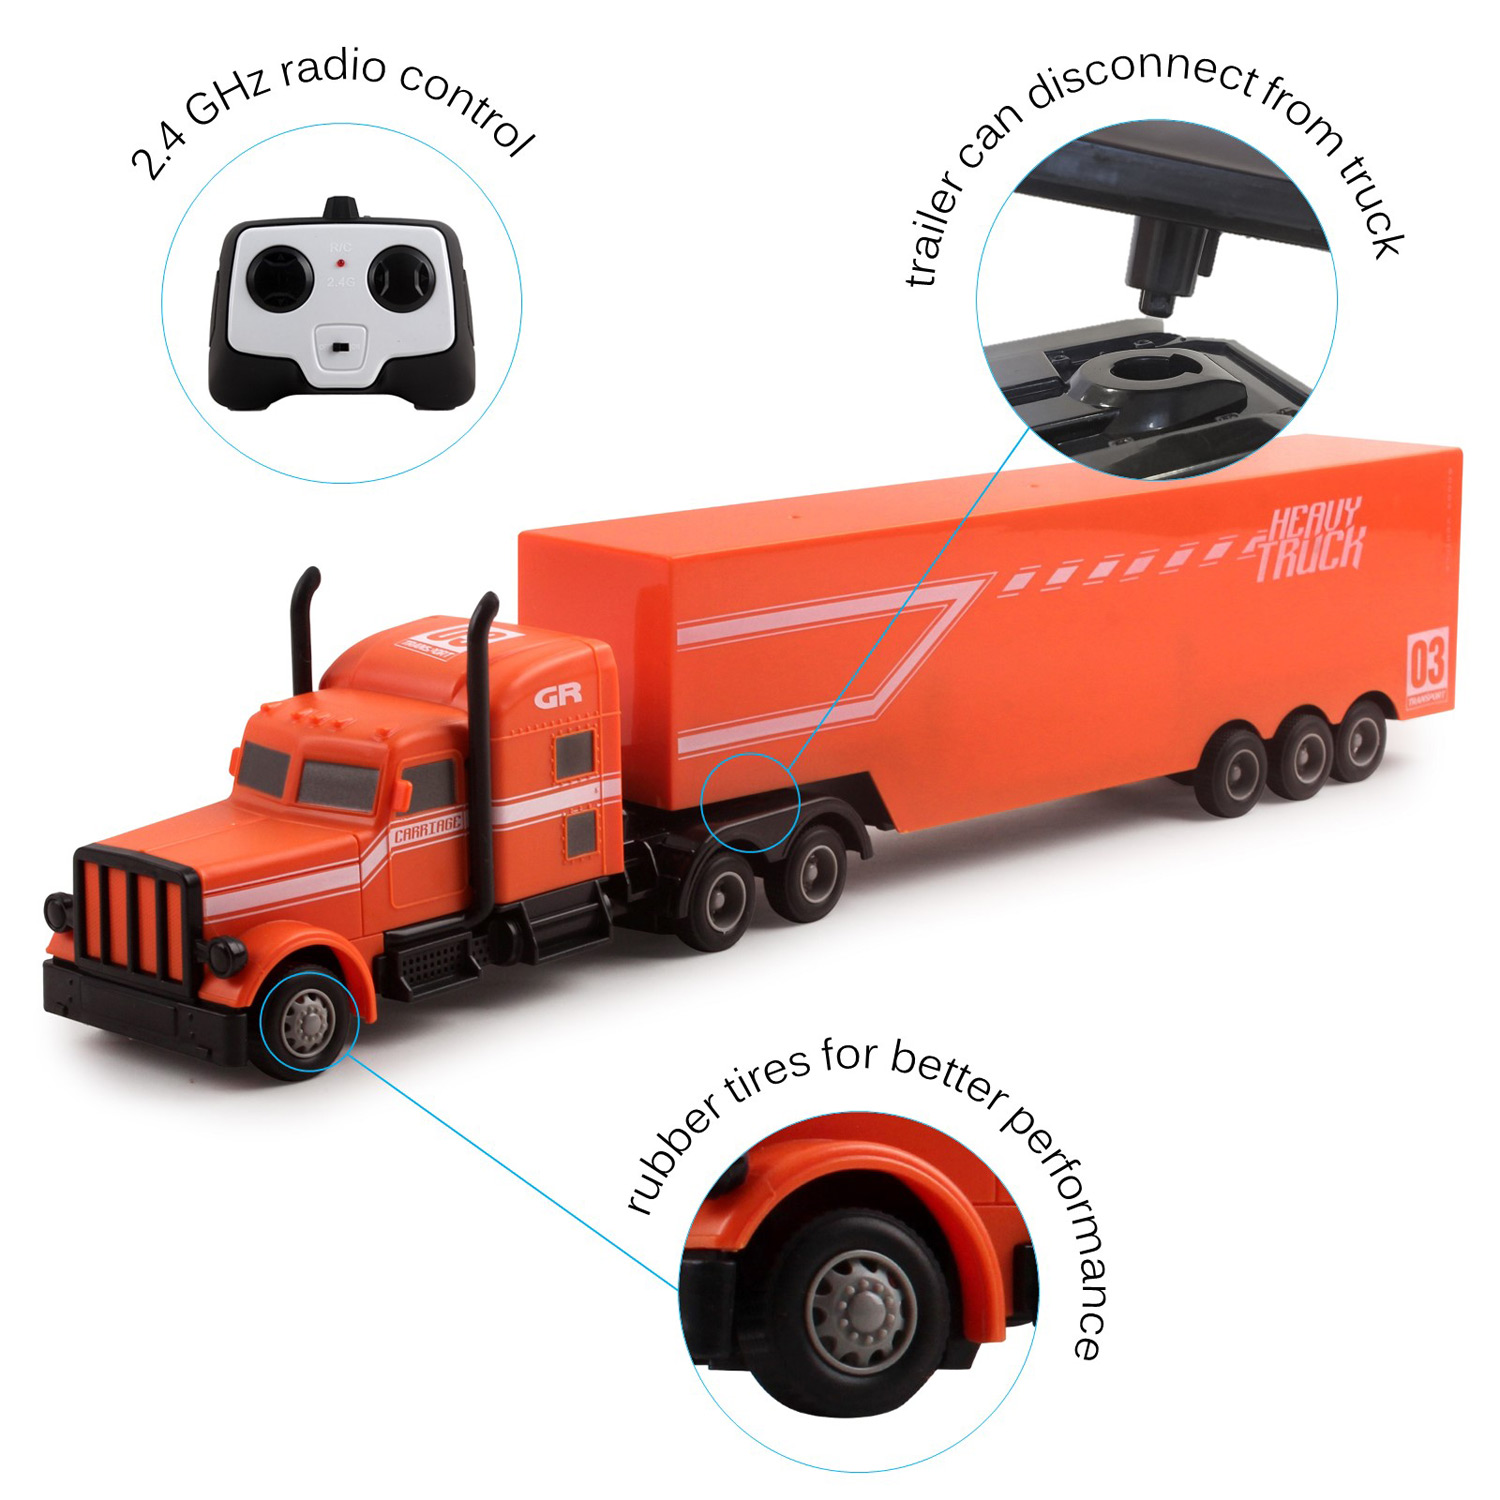 Large RC Semi Truck Trailer 18 24Ghz Fast Speed 116 Scale Electric Hauler Rechargeable Remote Control Kids Big Rig Toy Carrier Van Transporter Vehicle Full Cargo Perfect Gift For Children TM-51